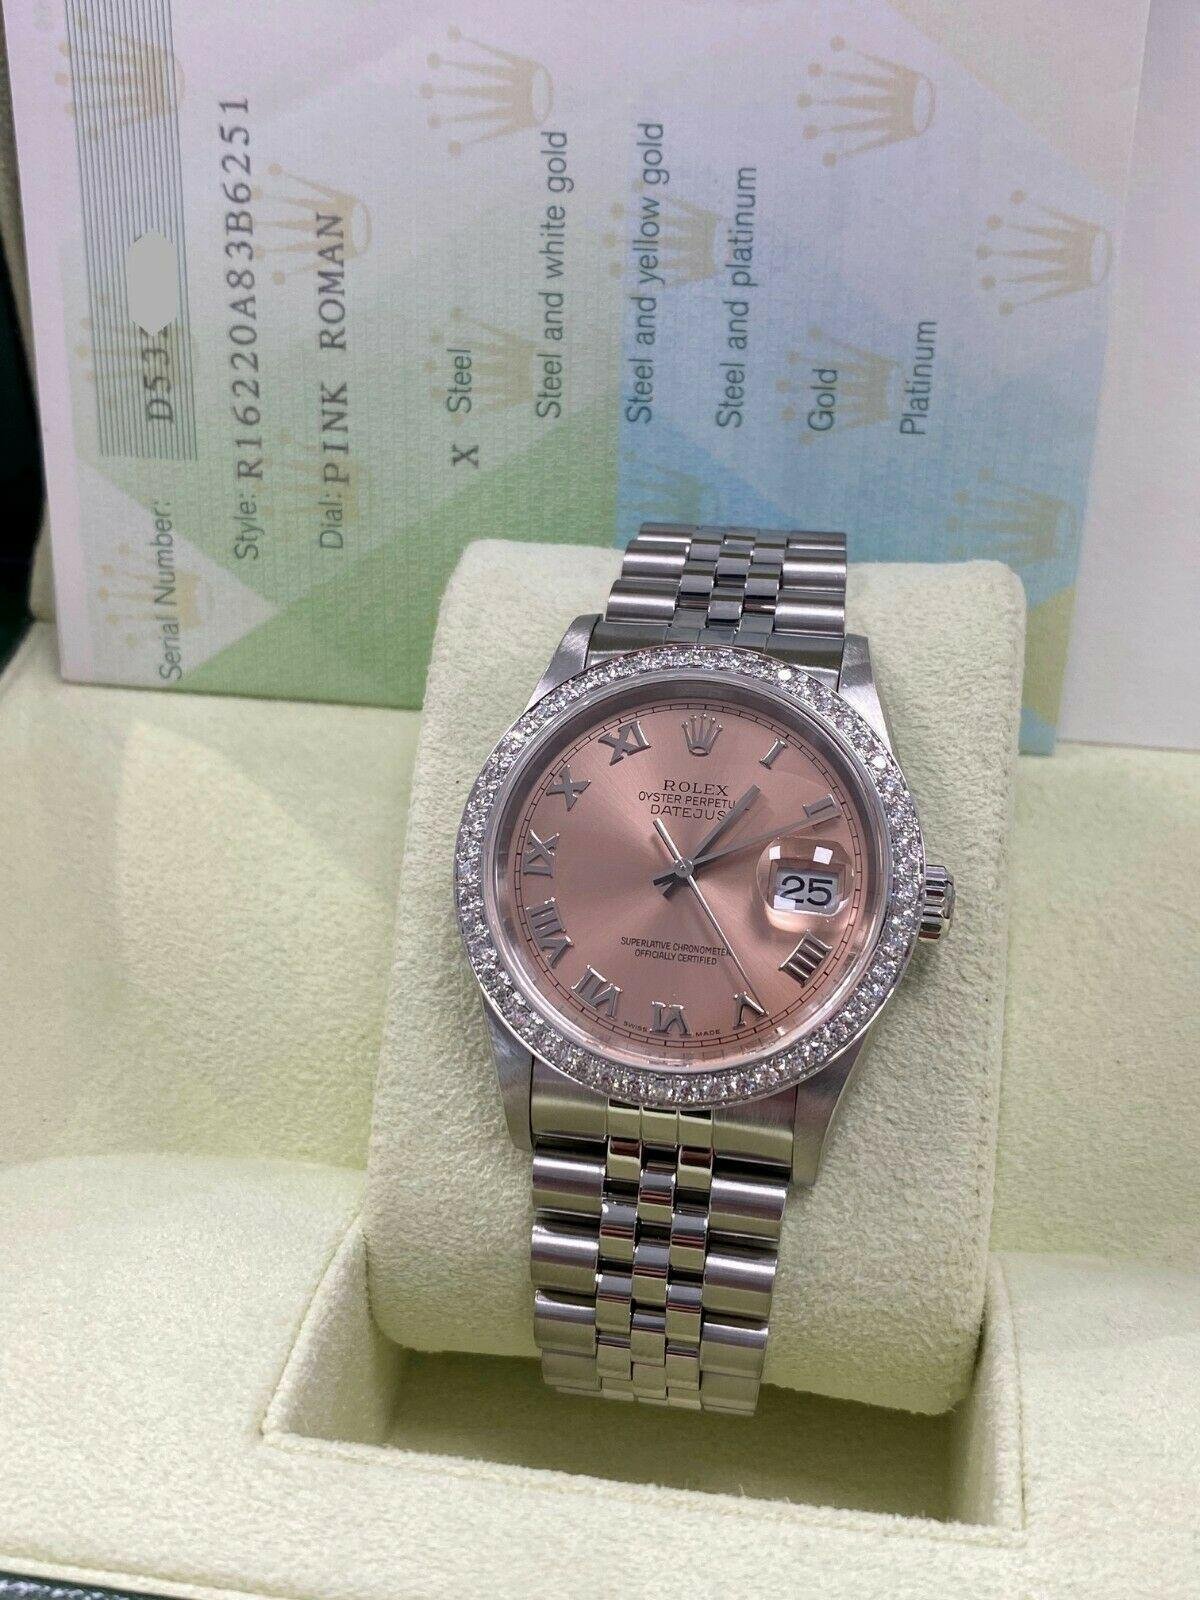 Rolex Datejust 16220 Pink Dial Diamond Bezel Stainless Steel Box Papers